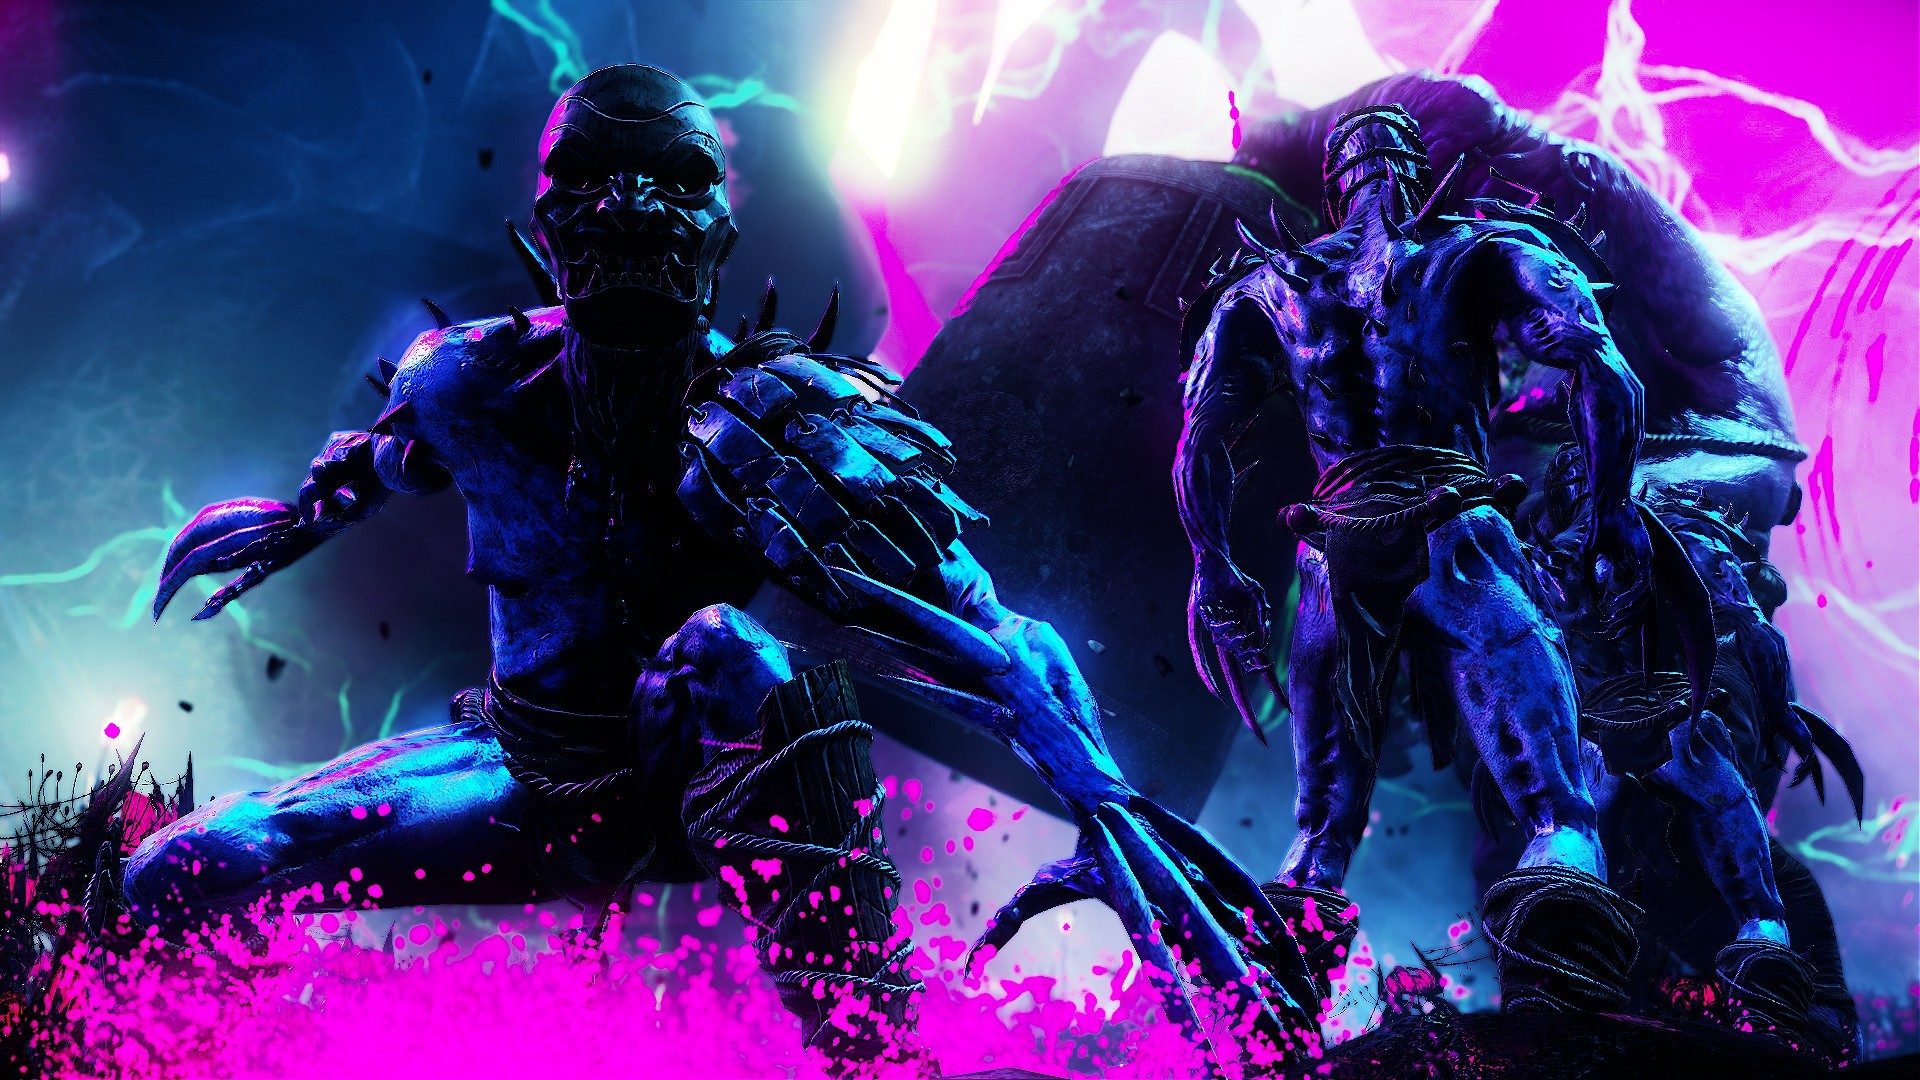 Shadow Warrior 2, Pink, Neon, Blue, Enemy Wallpapers HD / Desktop and Mobile Backgrounds